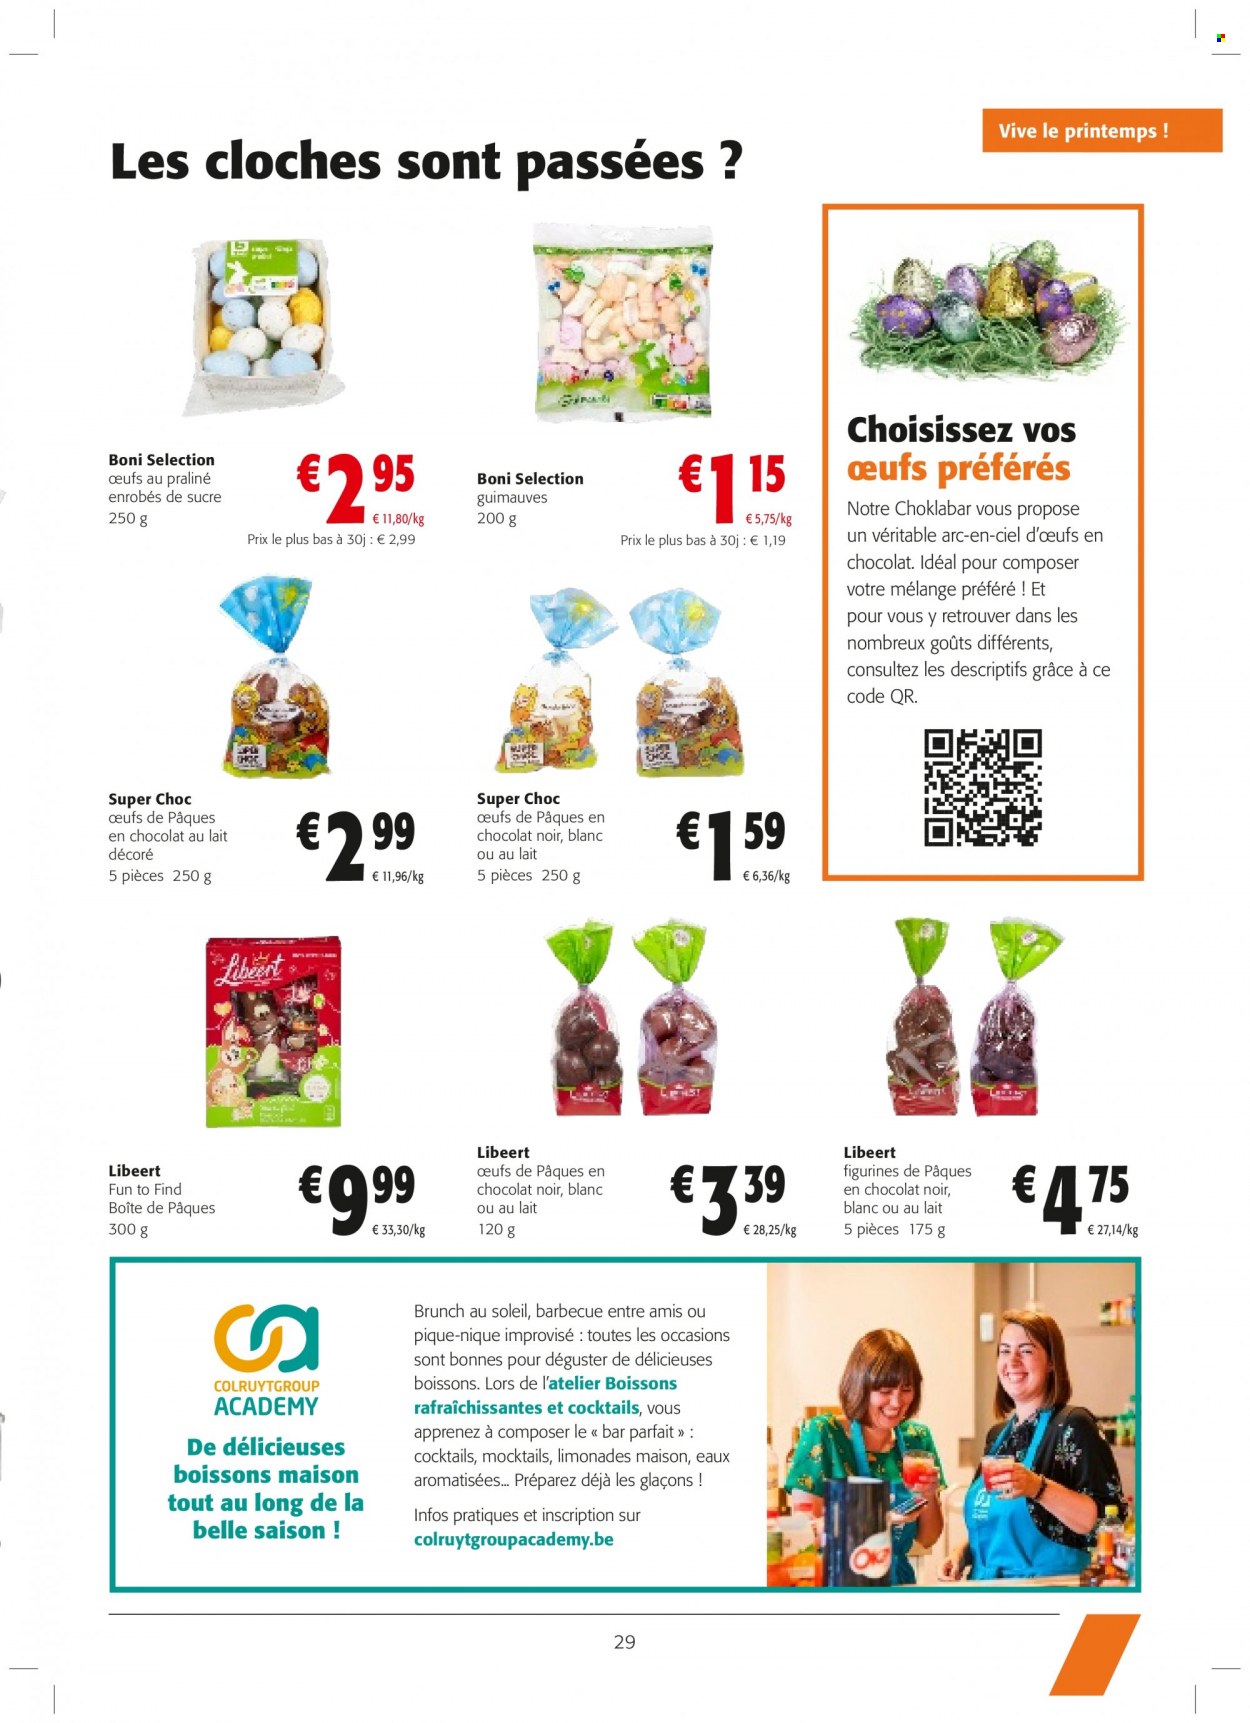 Catalogue Colruyt - 22.3.2023 - 4.4.2023. Page 6.